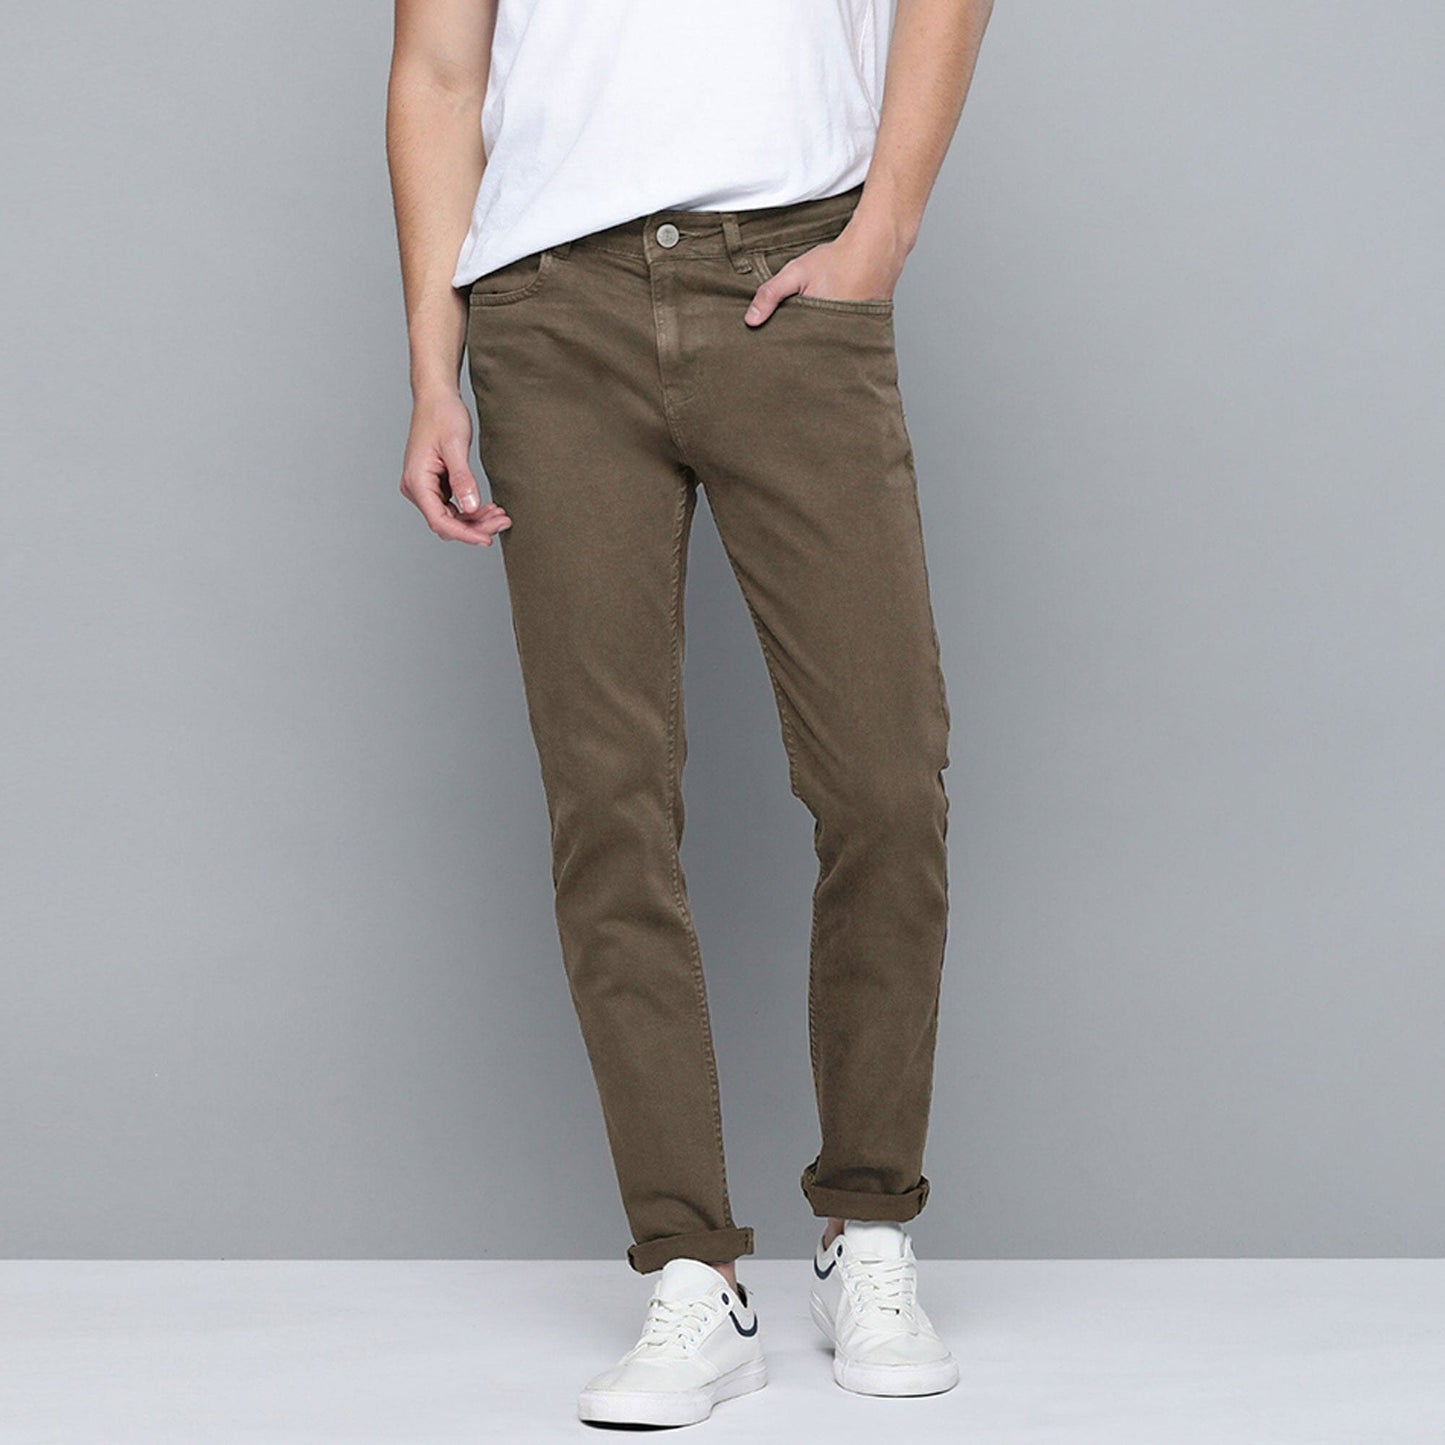 Cut Label Men's Slim Fit Chino Pants Men's Chino First Choice Brown 28 30